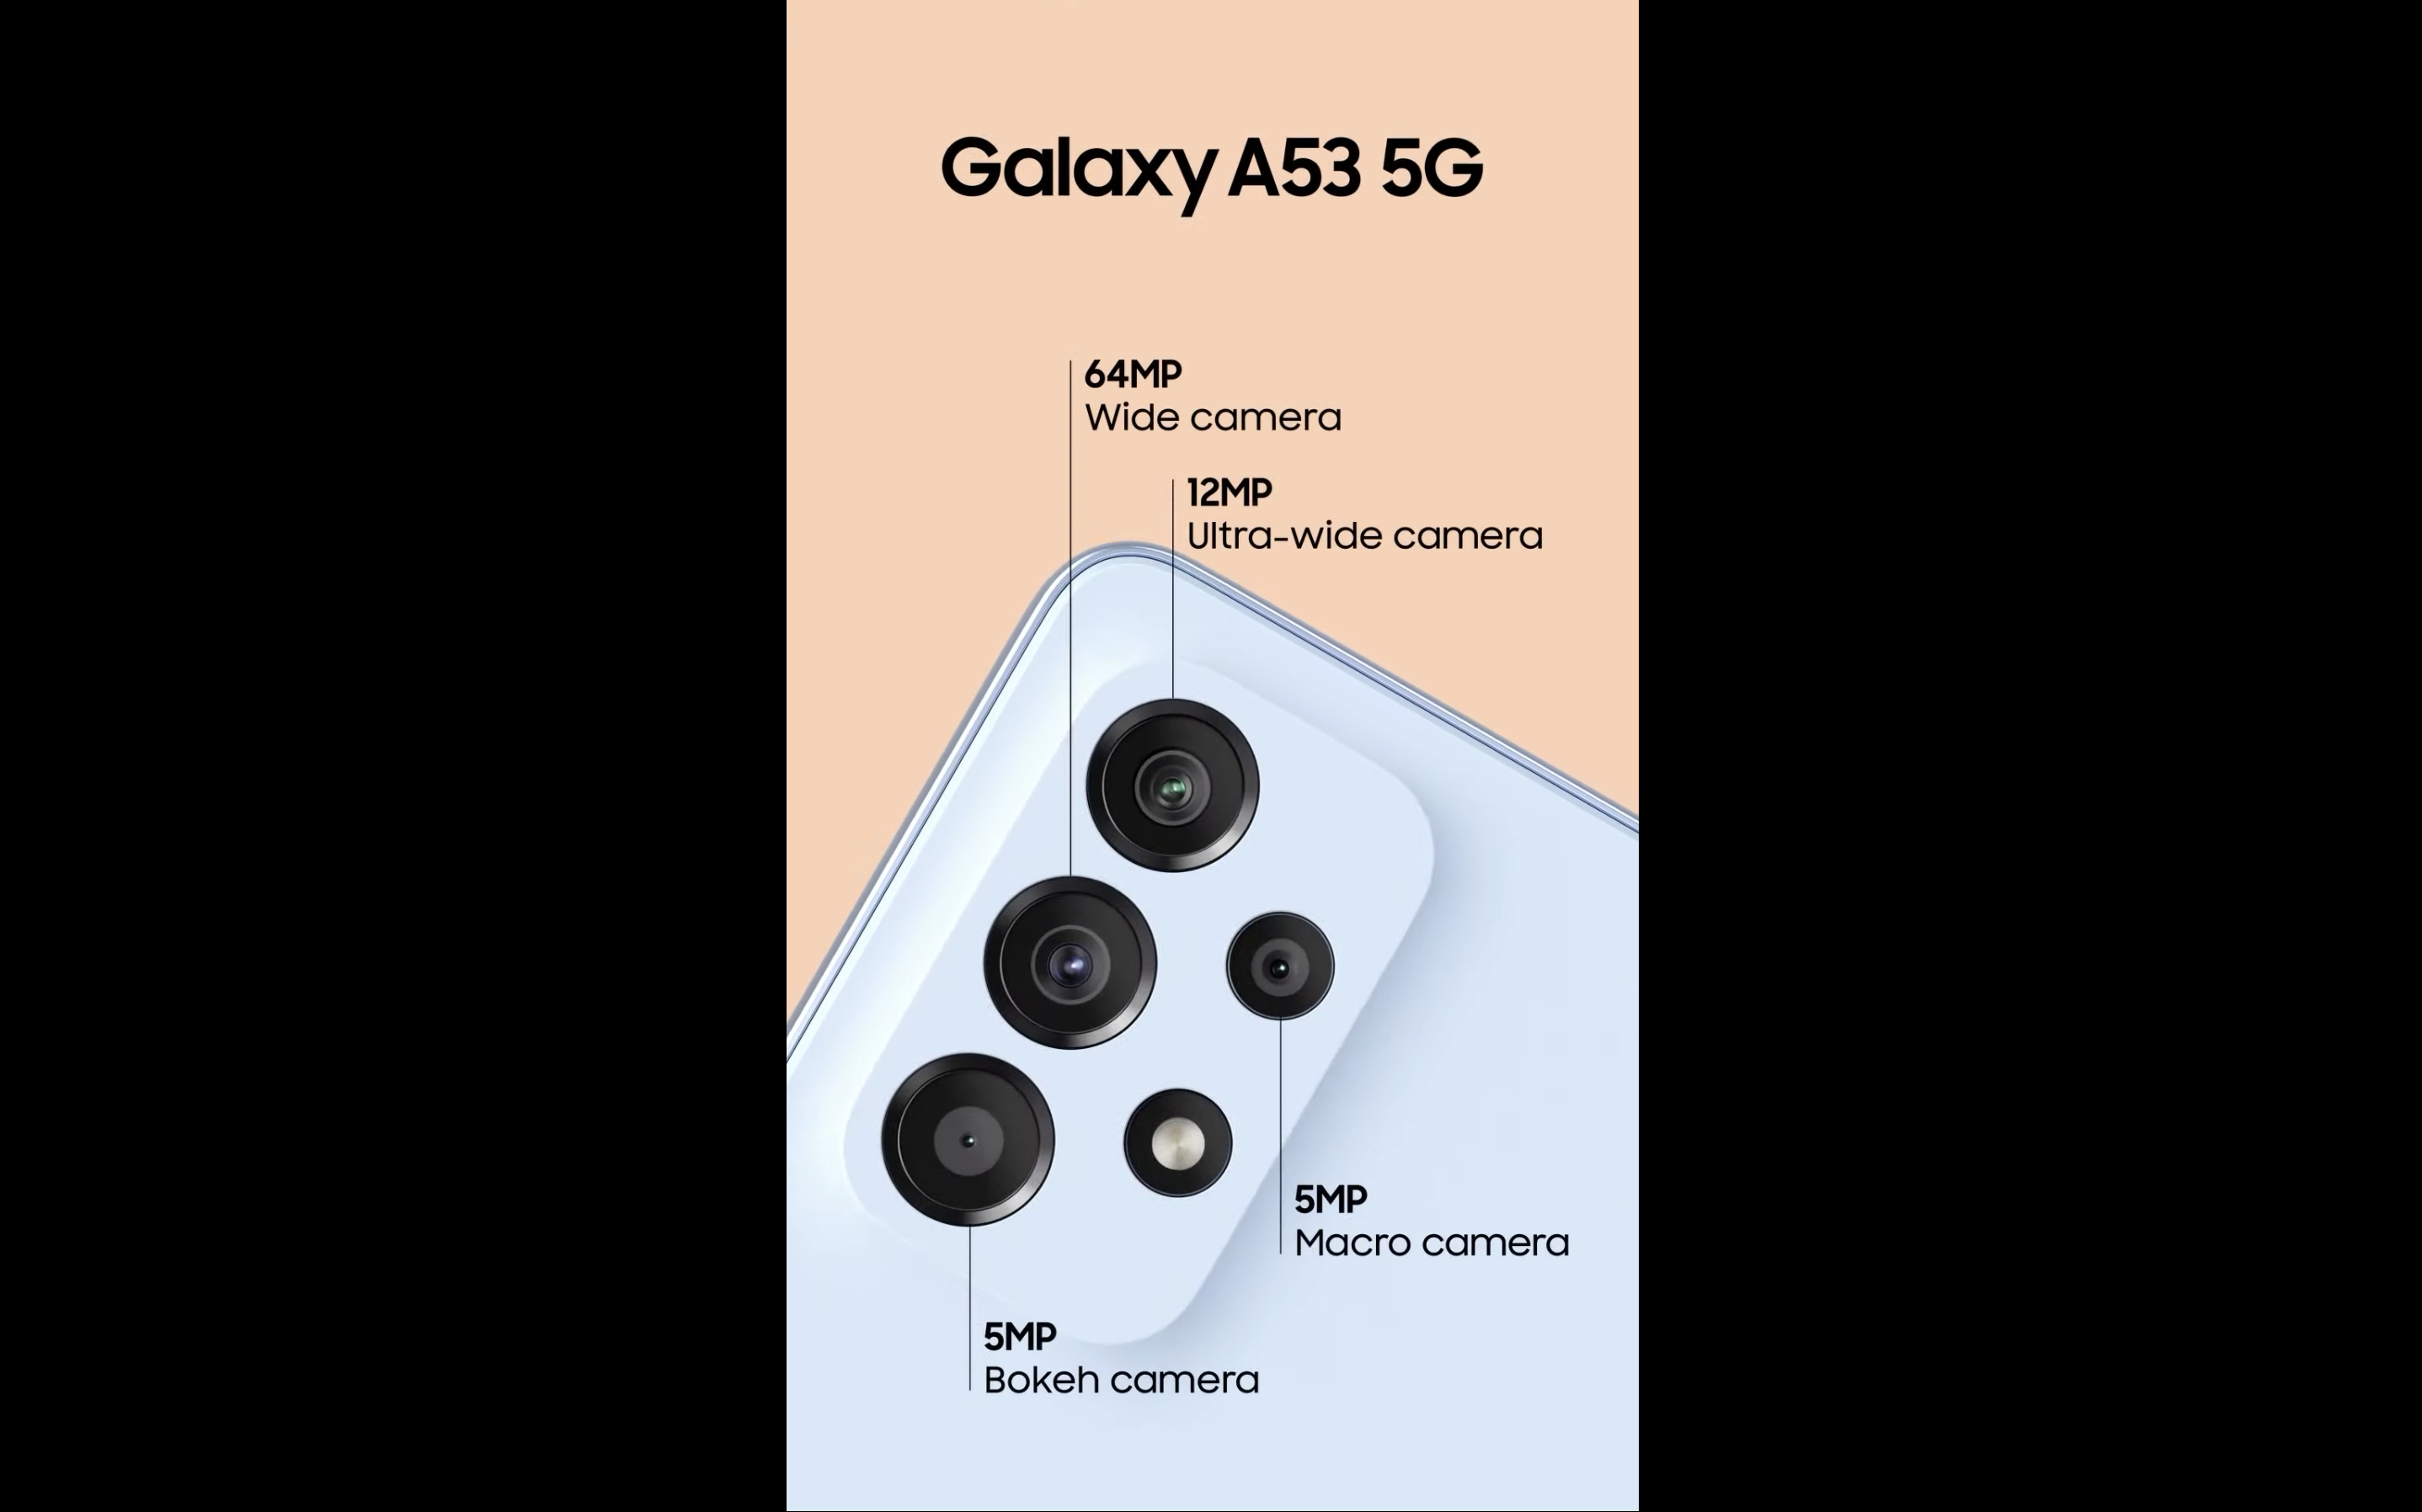 Samsung Galaxy A53 and A33 are revealed at the Galaxy A 2022 event